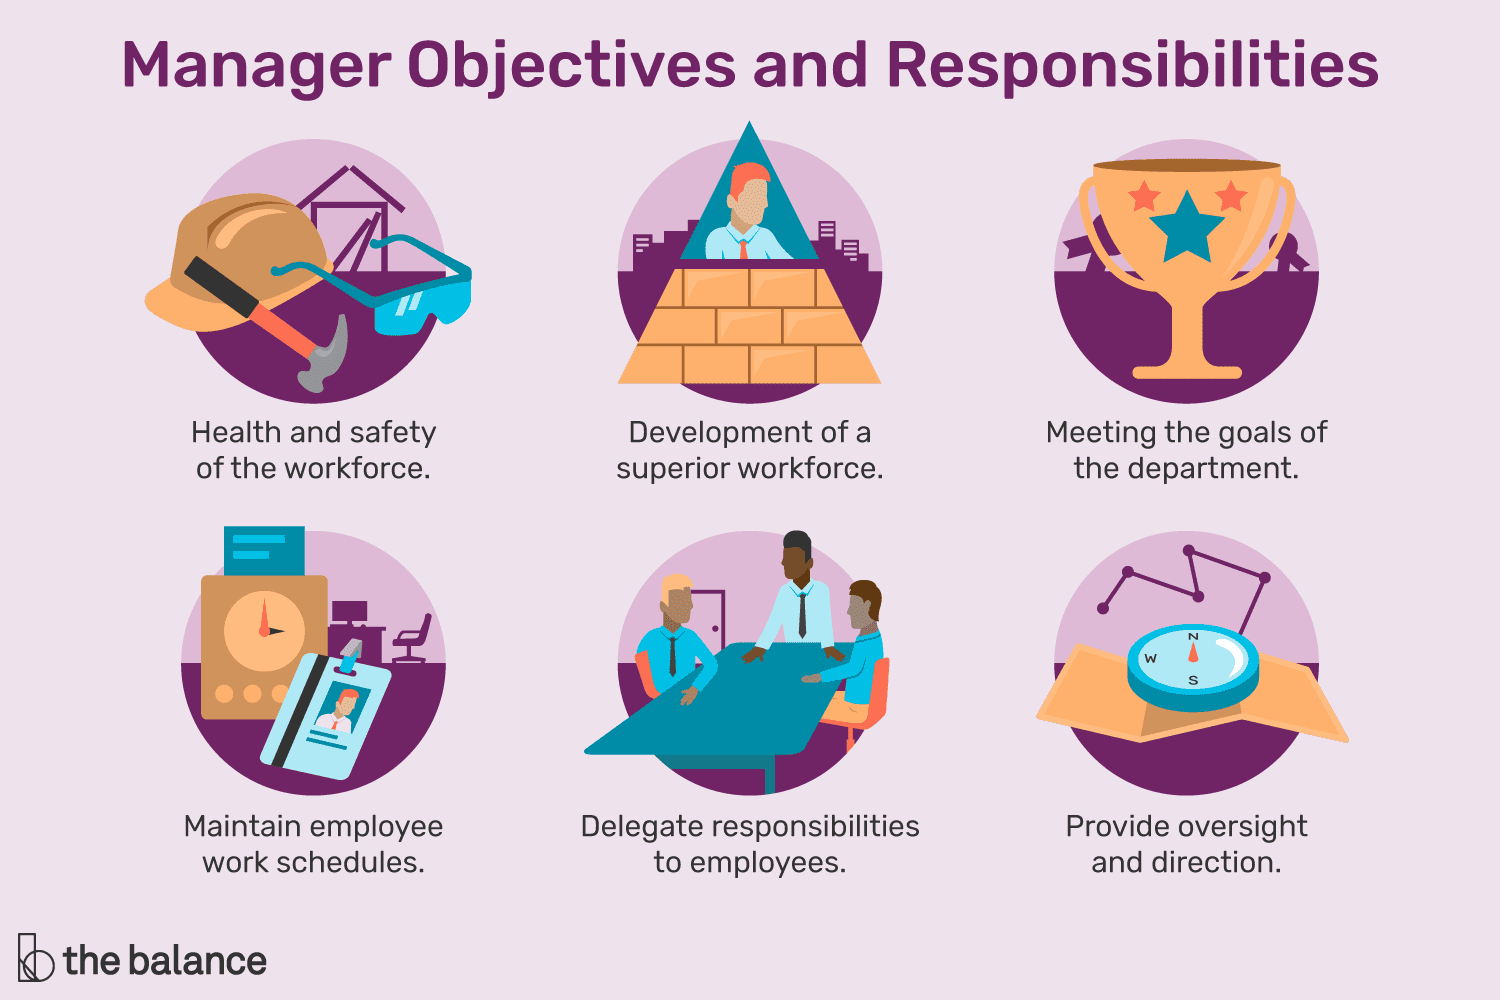 What is an important job responsibility for a middle manager